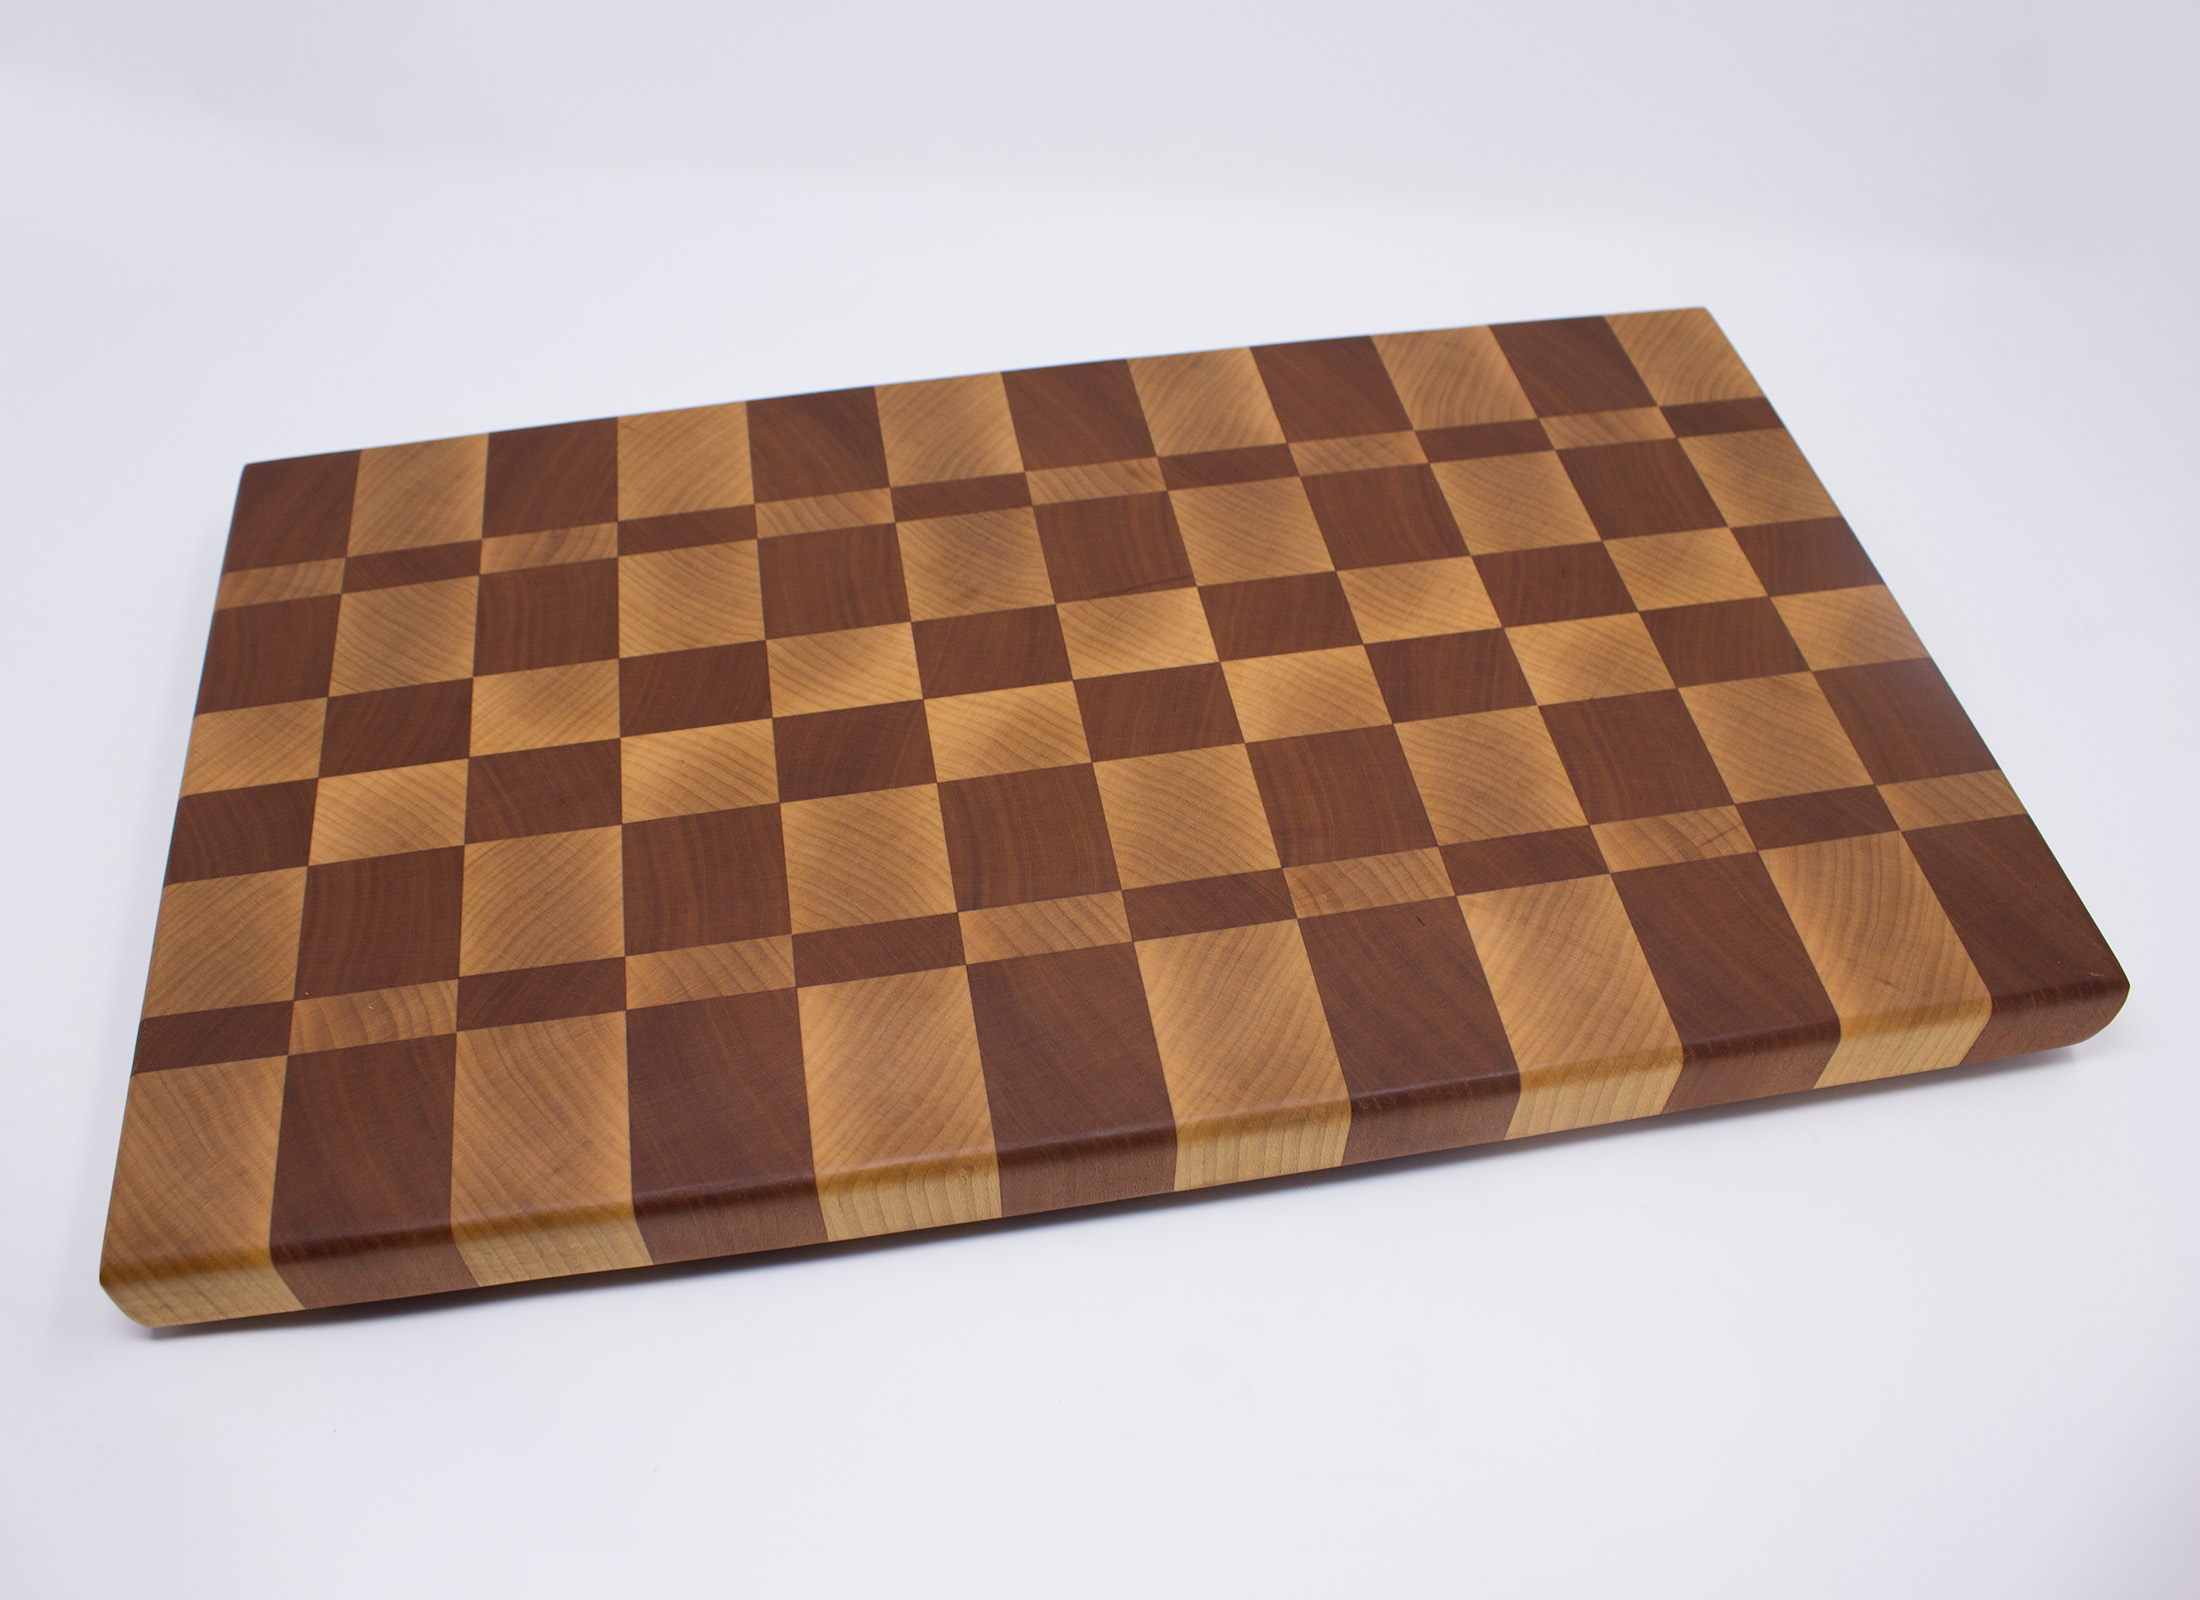 https://www.rockfordwoodcrafts.com/wp-content/uploads/Maple-and-Cherry-Checkerboard-End-Grain-Cutting-Board-Top-Angled.jpg